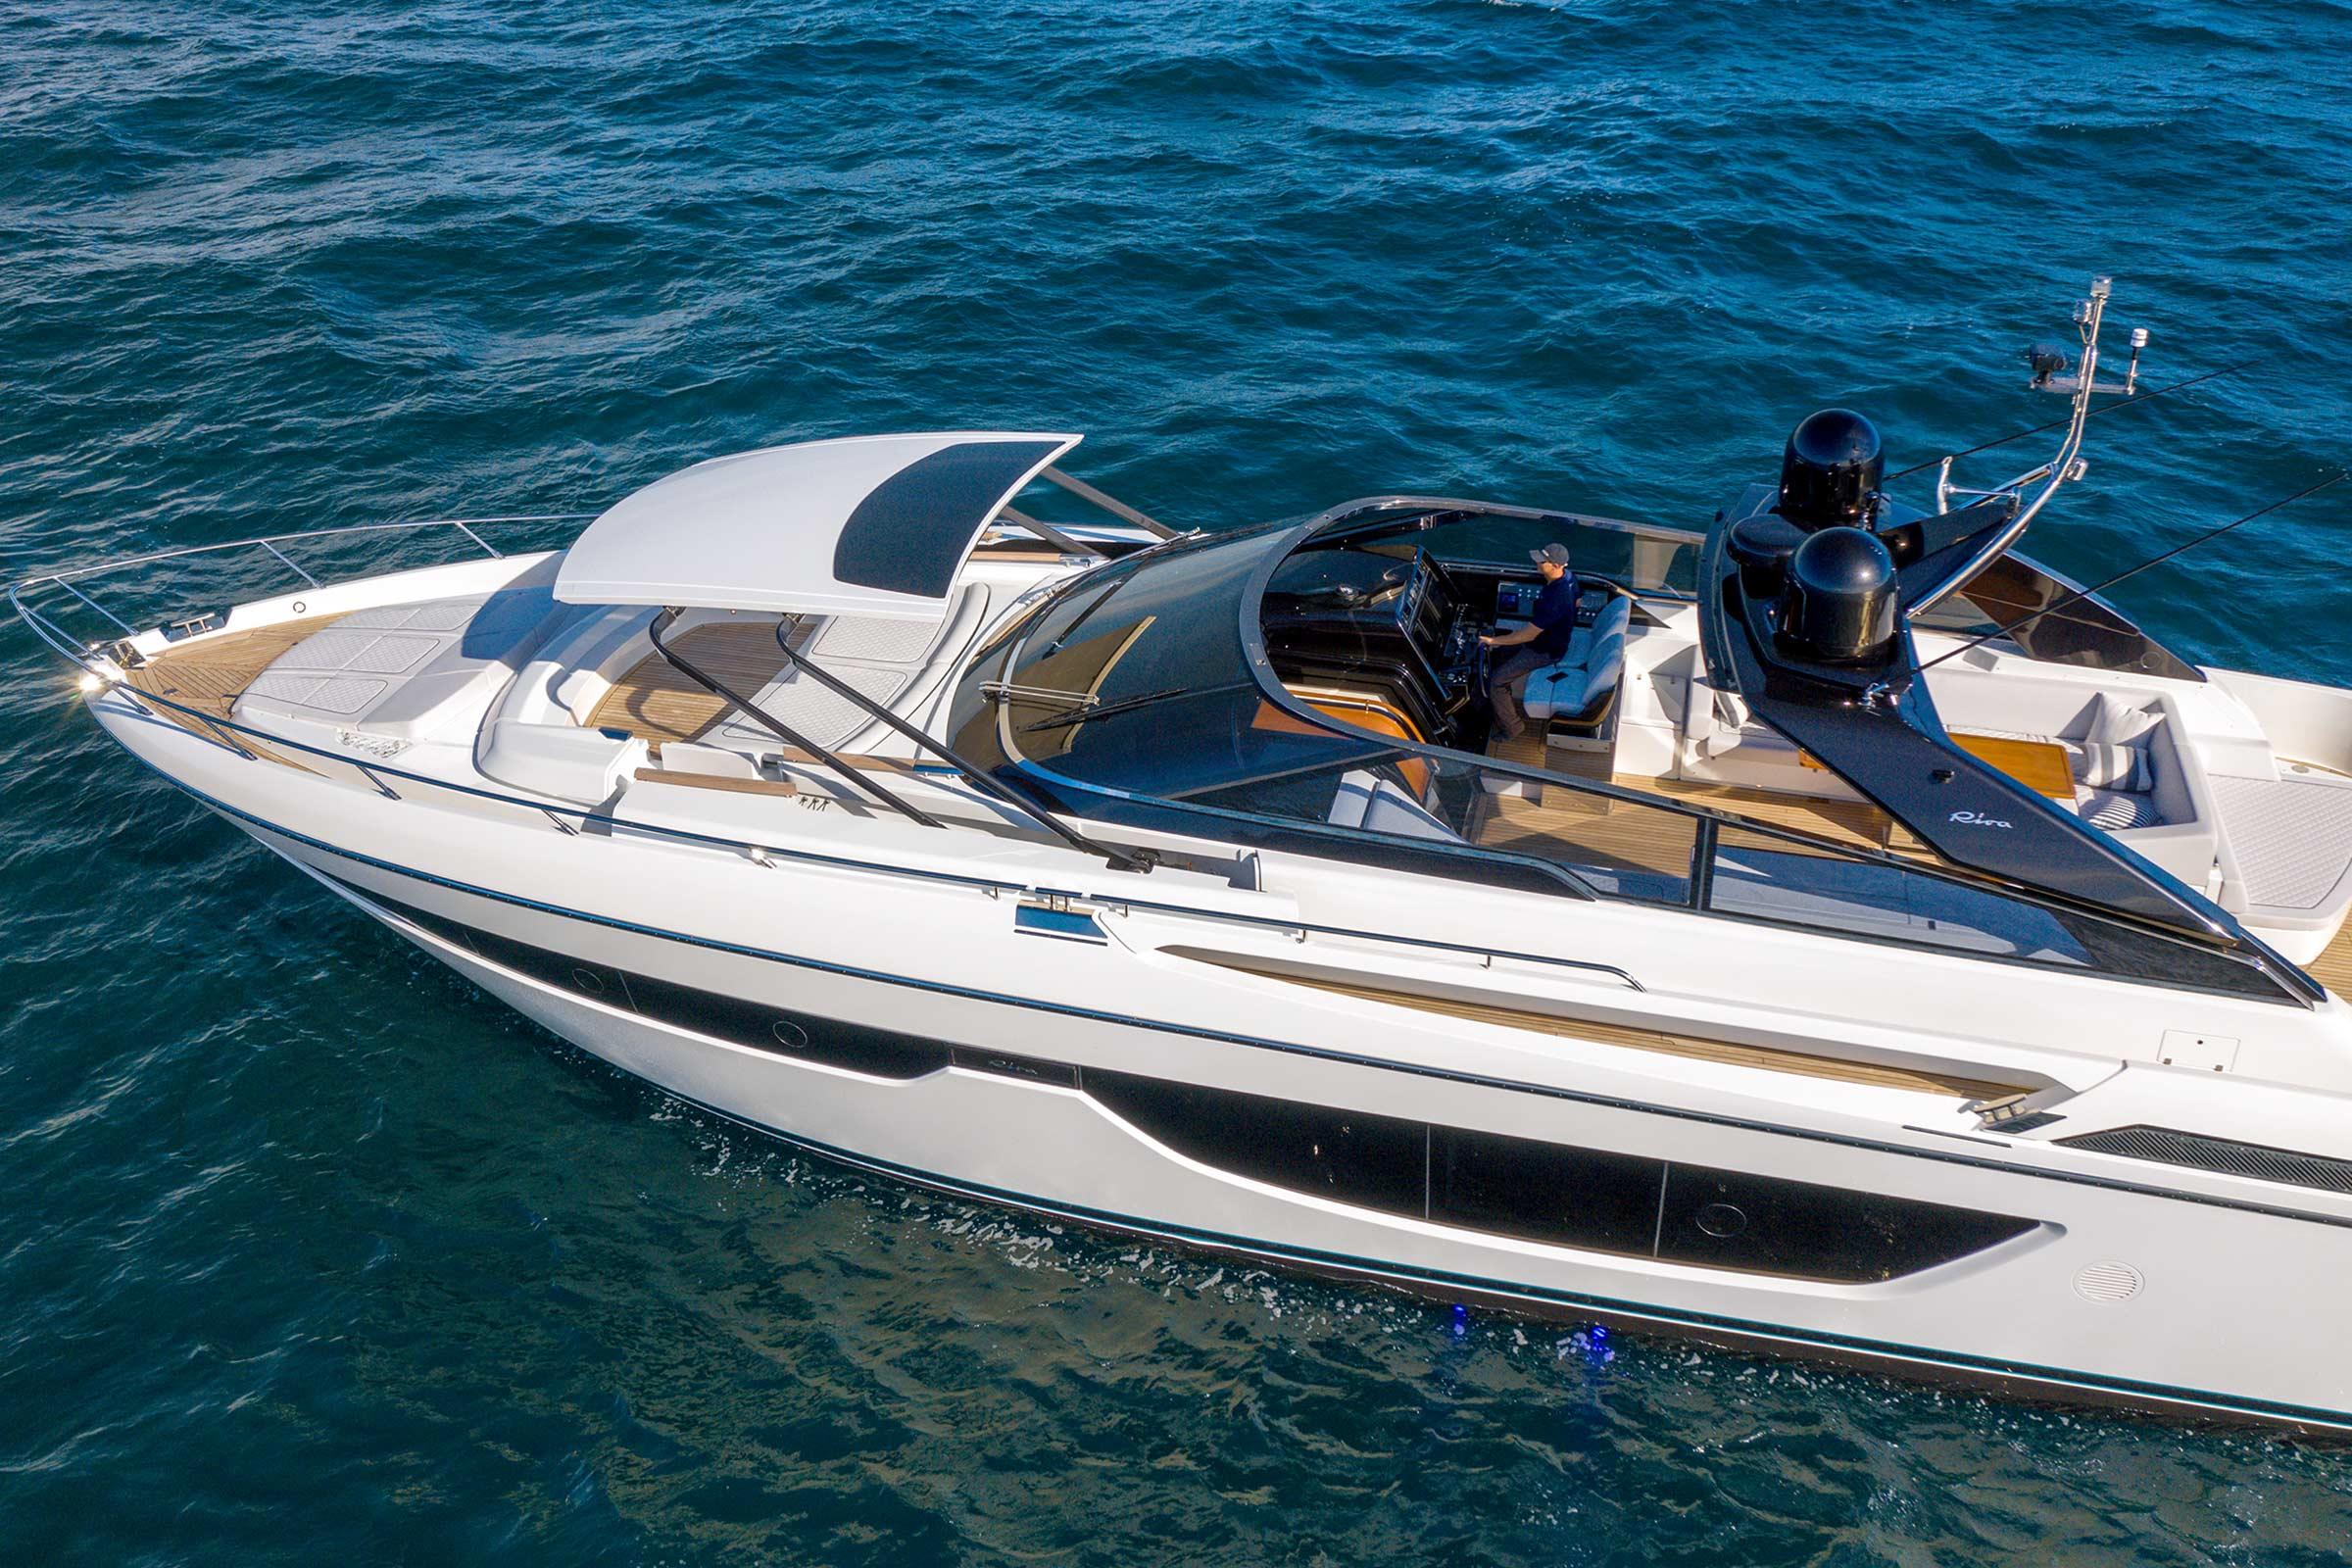 2019 Riva 76 ft Yacht For Sale | Allied Marine